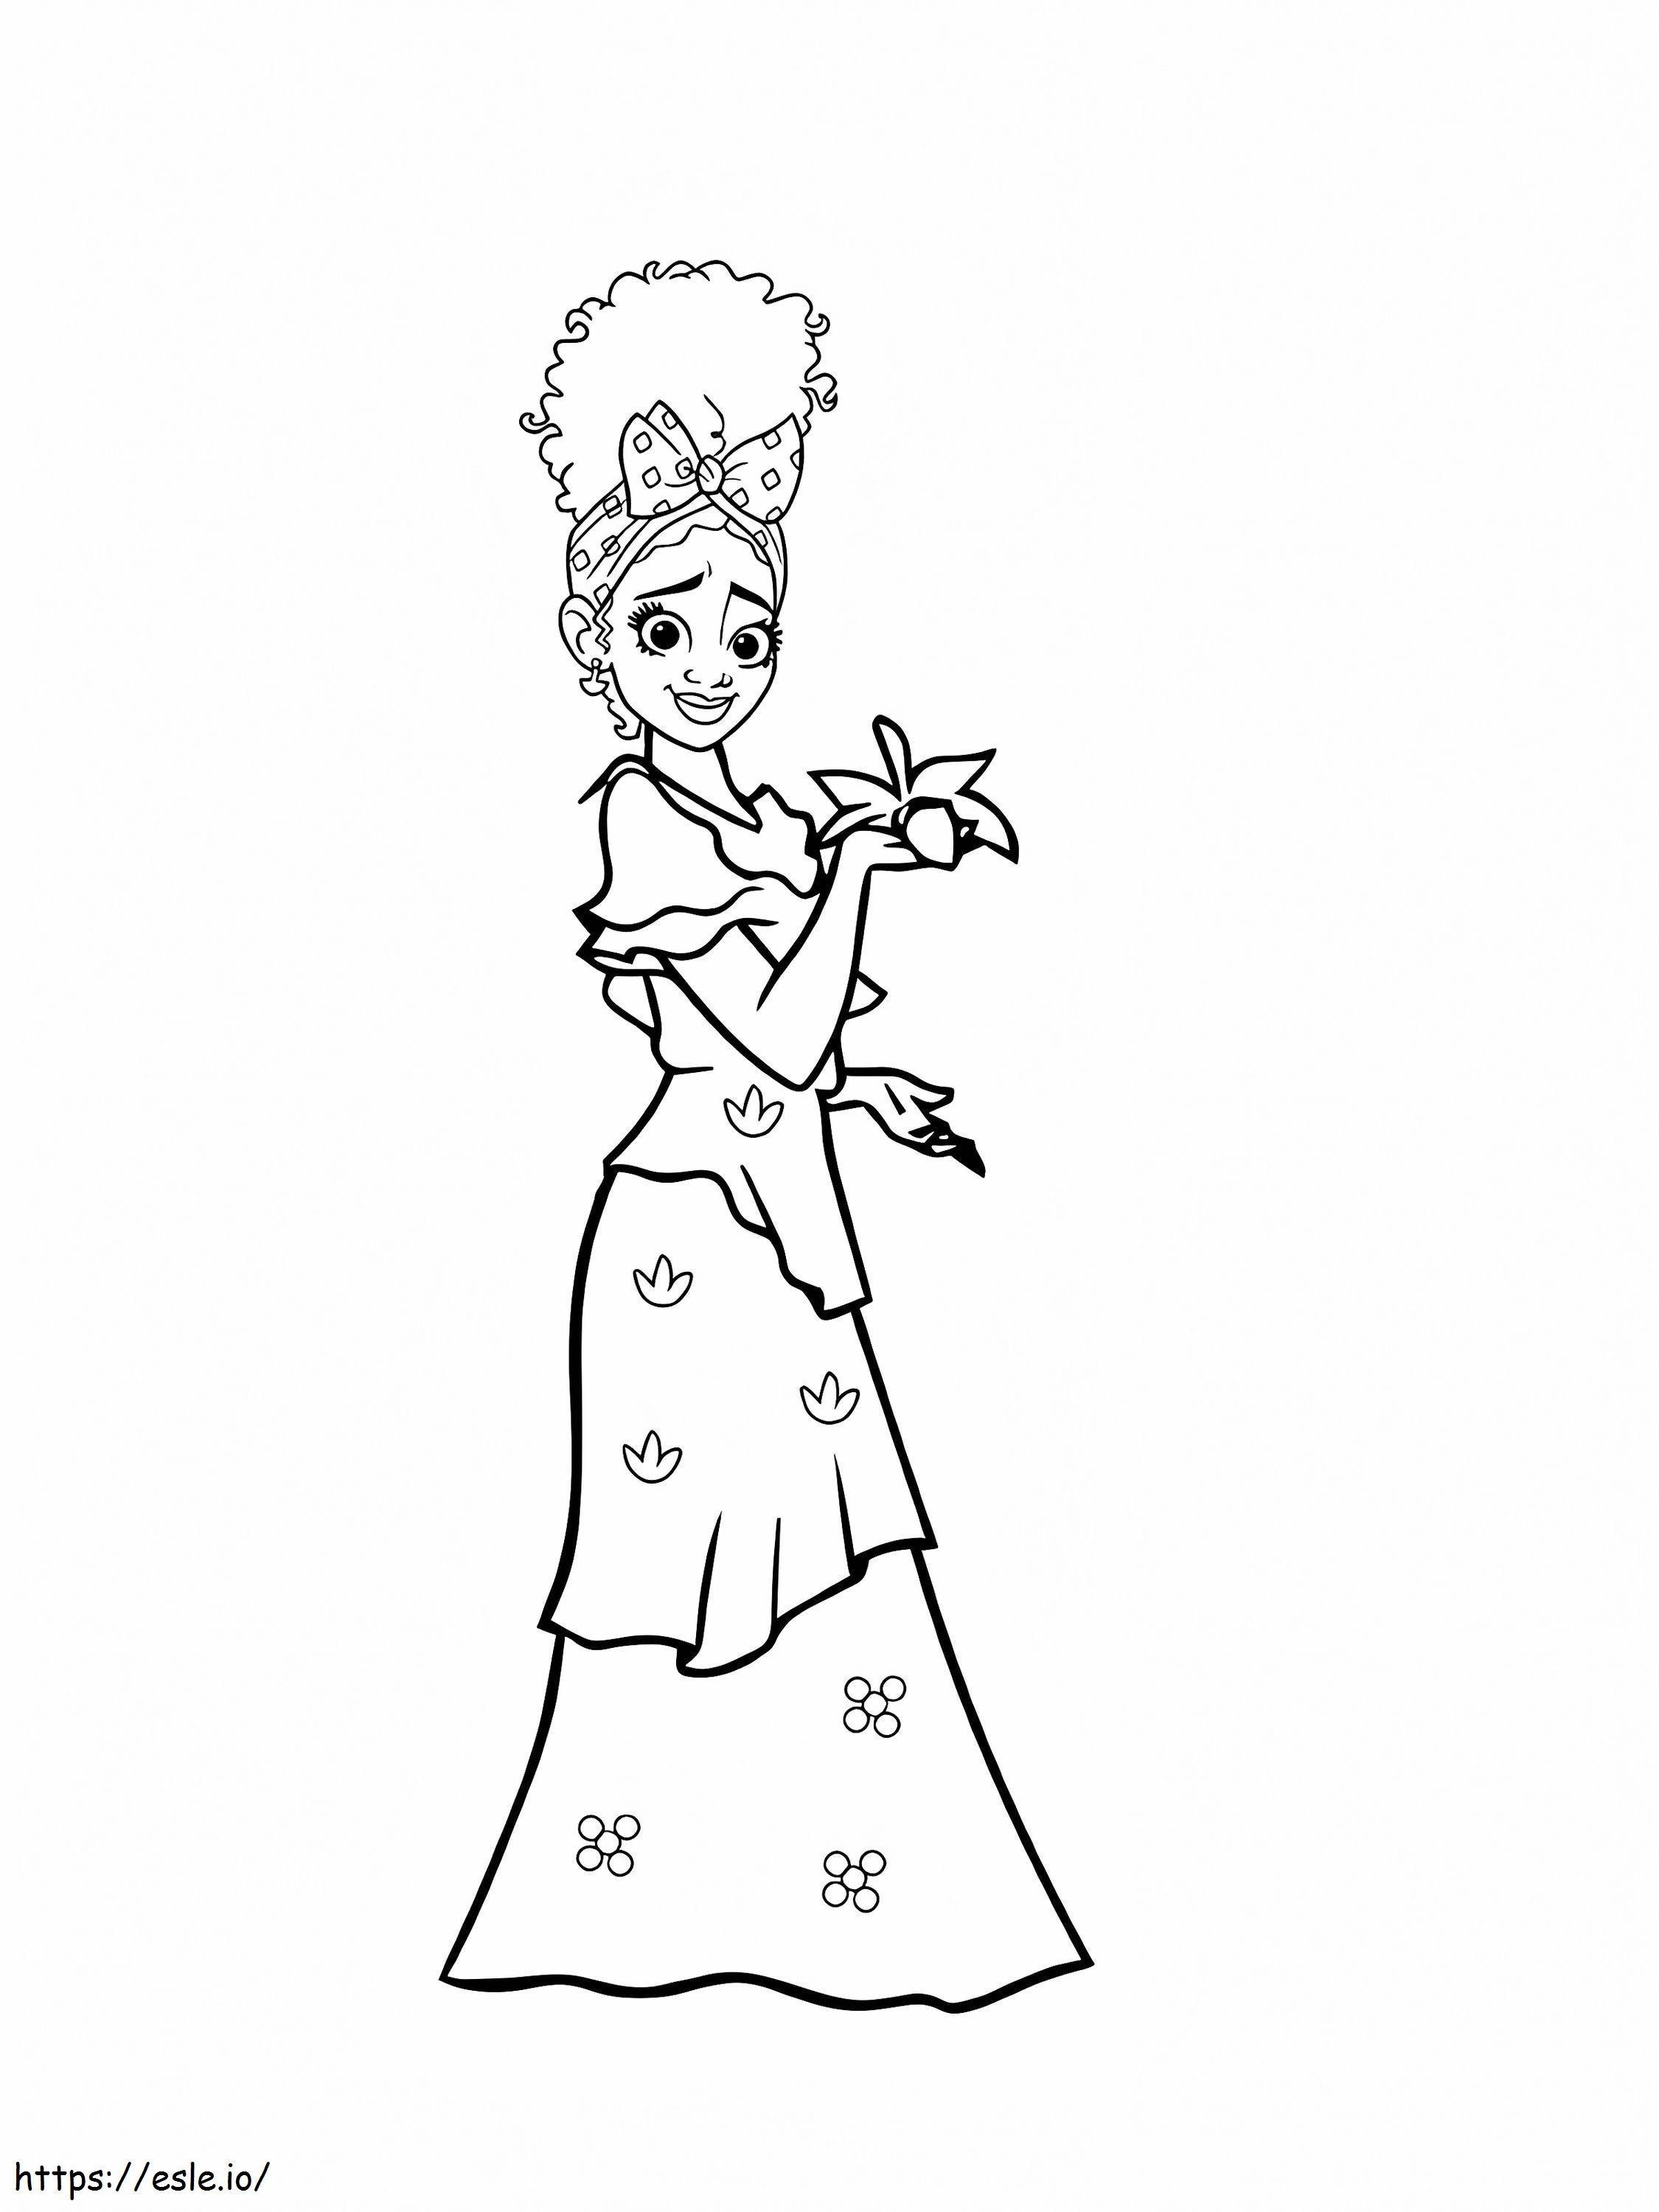 Flower And Charm Dolores Madrigal coloring page